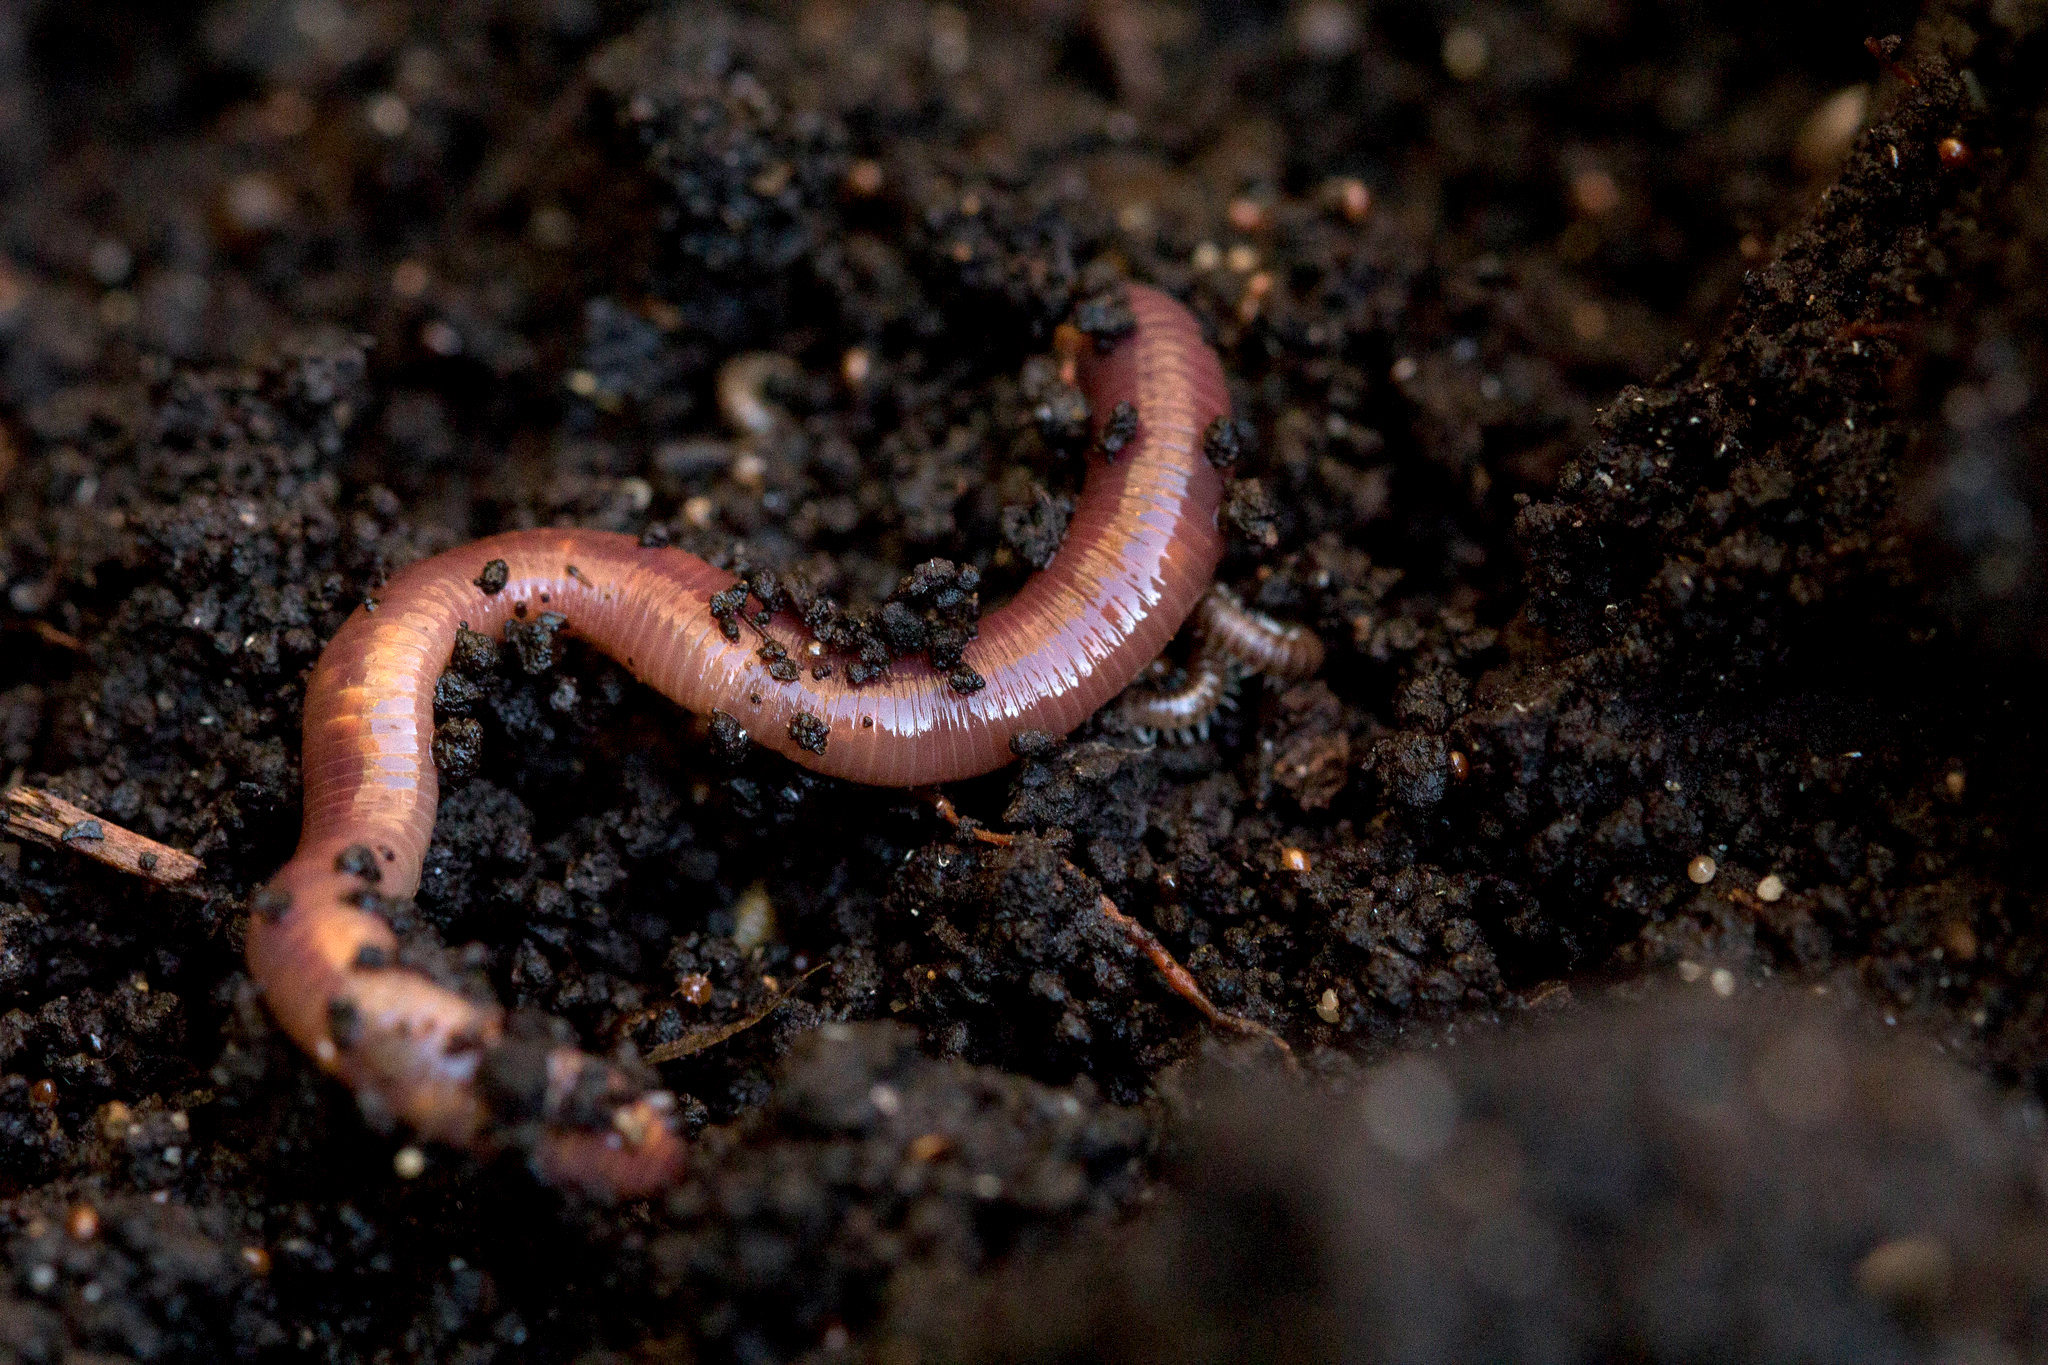 Image of Earthworms crawling in soil